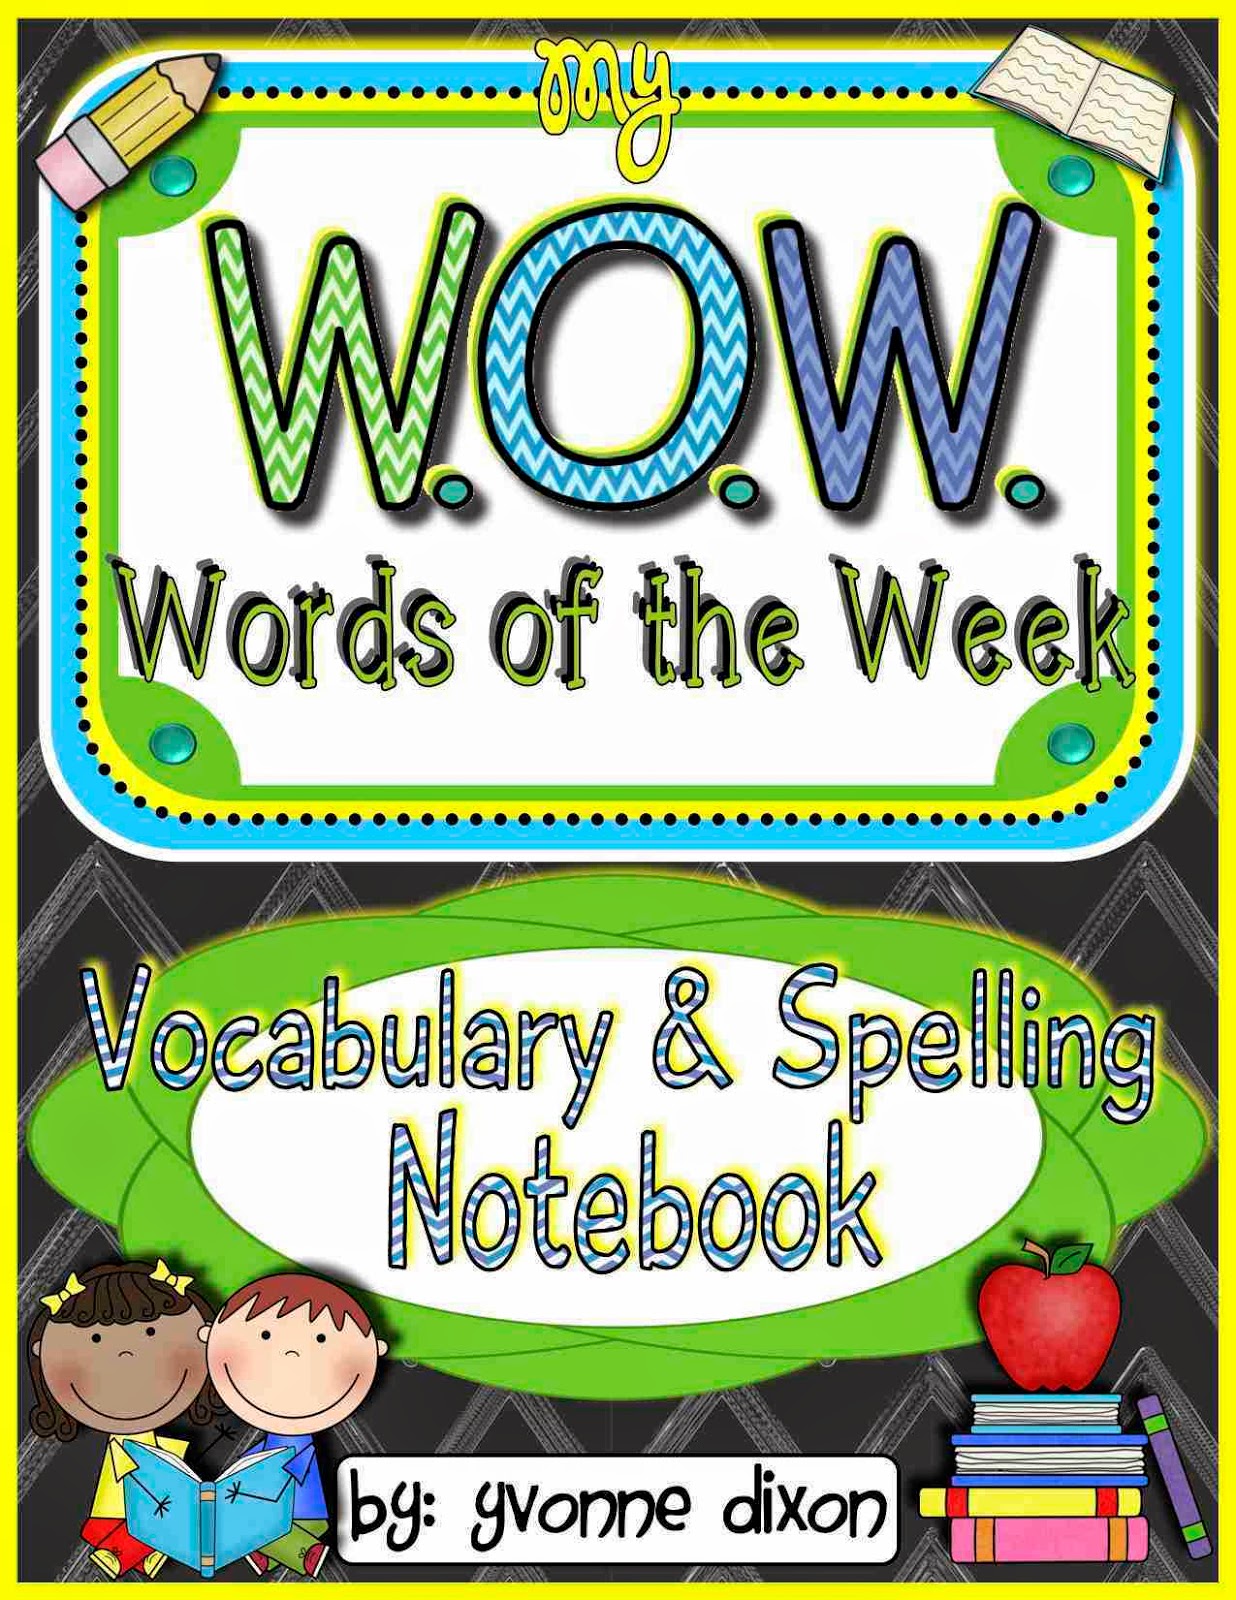 http://www.teacherspayteachers.com/Product/WOW-Words-of-the-Week-Vocabulary-and-Spelling-Interactive-Notebook-1357208